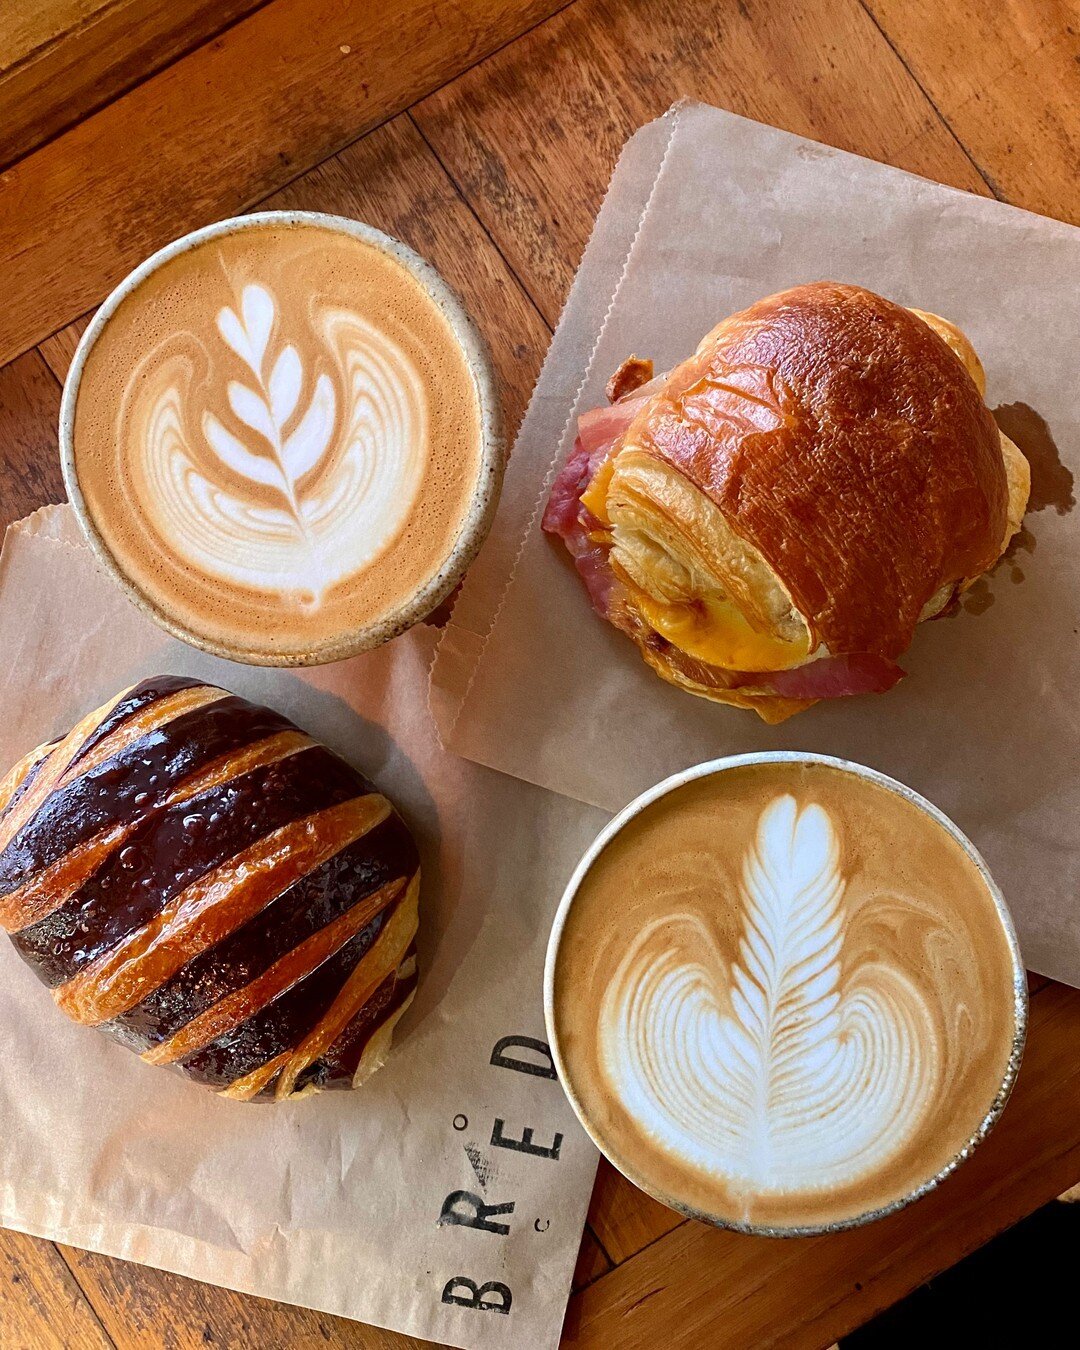 Oh yeah, it&rsquo;s definitely a bacon, egg &amp; cheese croissant and @stashcoffee kind of morning!! ☔️ ​​​​​​​​
​​​​​​​​
​​​​​​​​
#betterbread #bredco #bredbread #albany #sustainable #artisanbread #lovacore #sourdough #realbread #flourwatersalt #lo